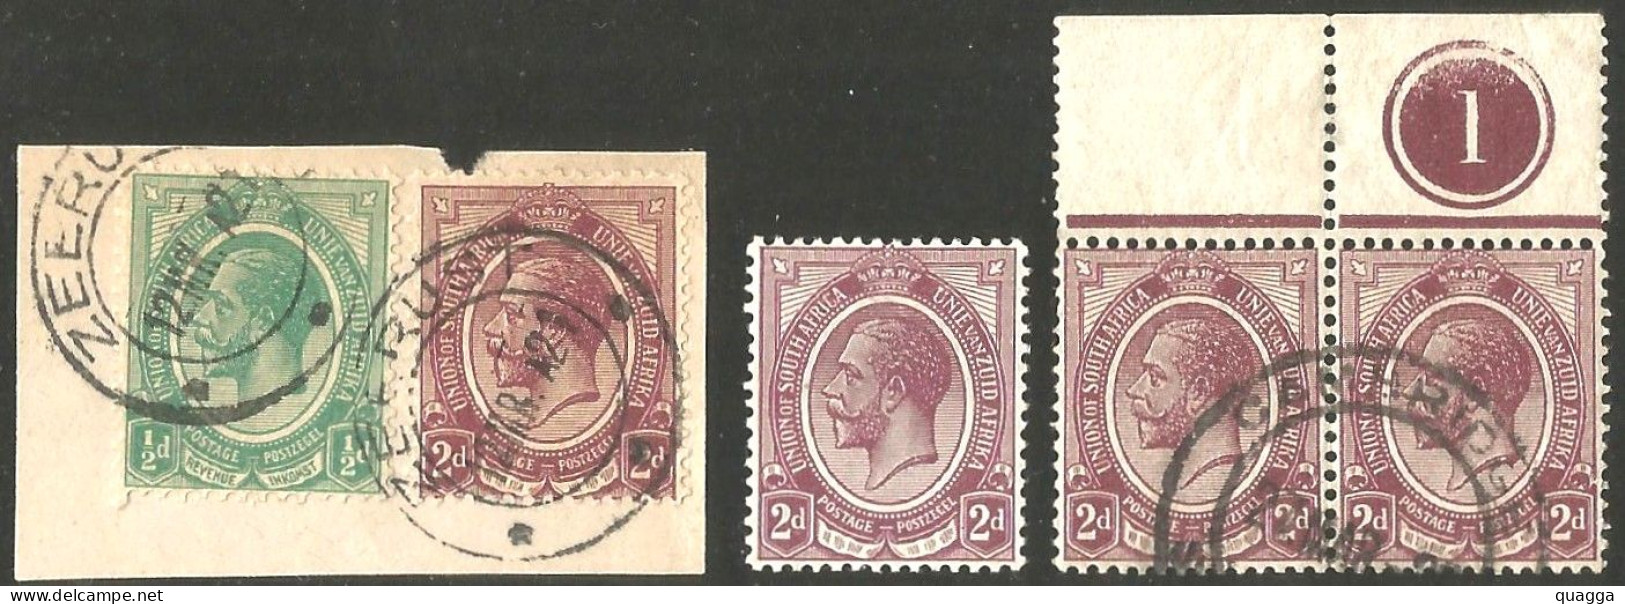 South Africa 1913. 2d Deep Purple Lot. SACC 5a, SG 6a. - Unused Stamps